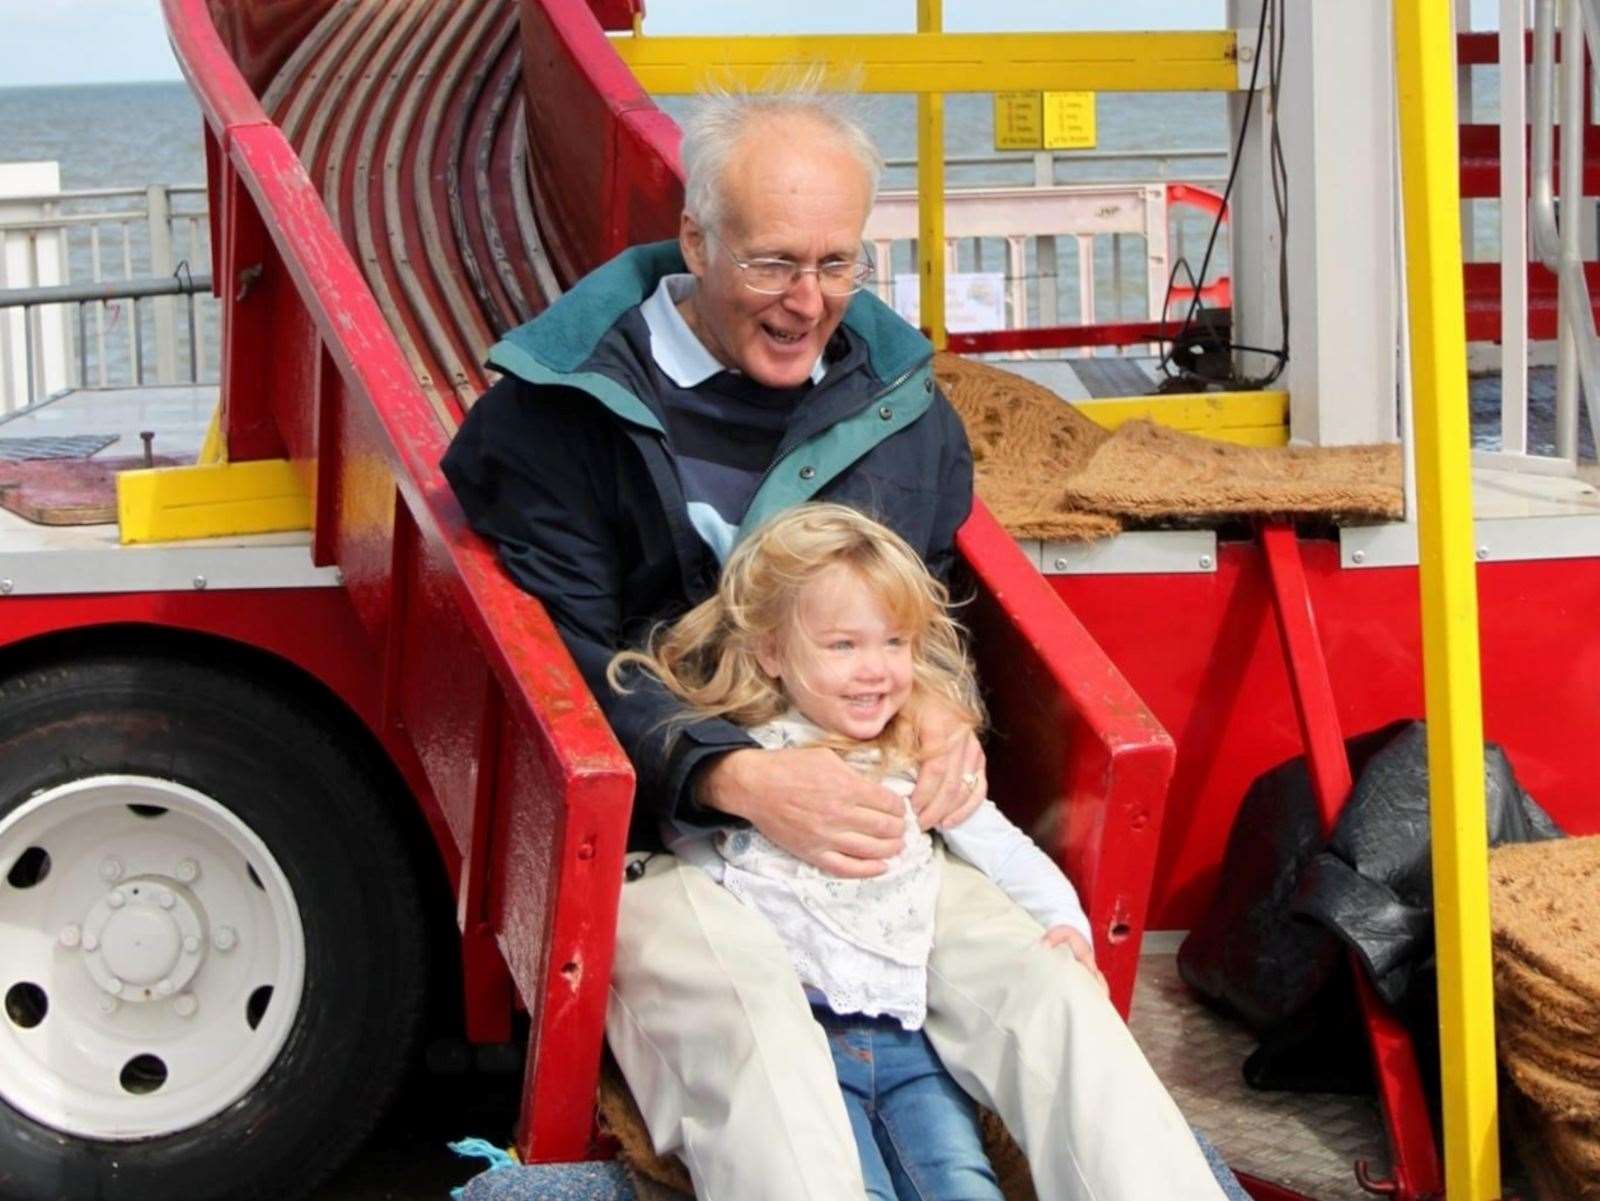 Clive Filsher with his grandaughter Grace before his cancer diagnosis